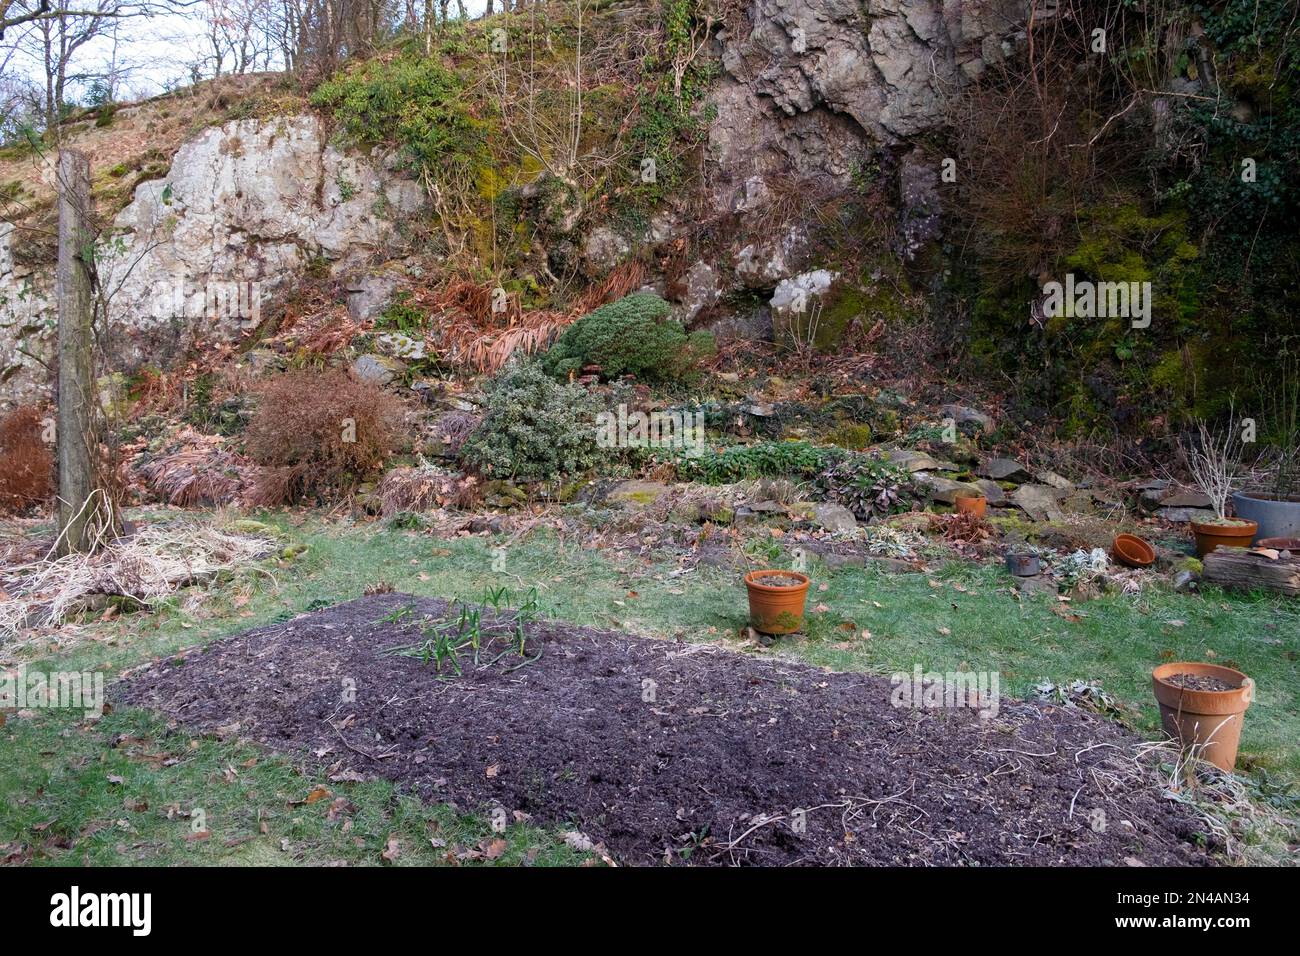 View of back garden in winter with empty terracotta pots and frozen soil ground Carmarthenshire Wales UK  KATHY DEWITT Stock Photo